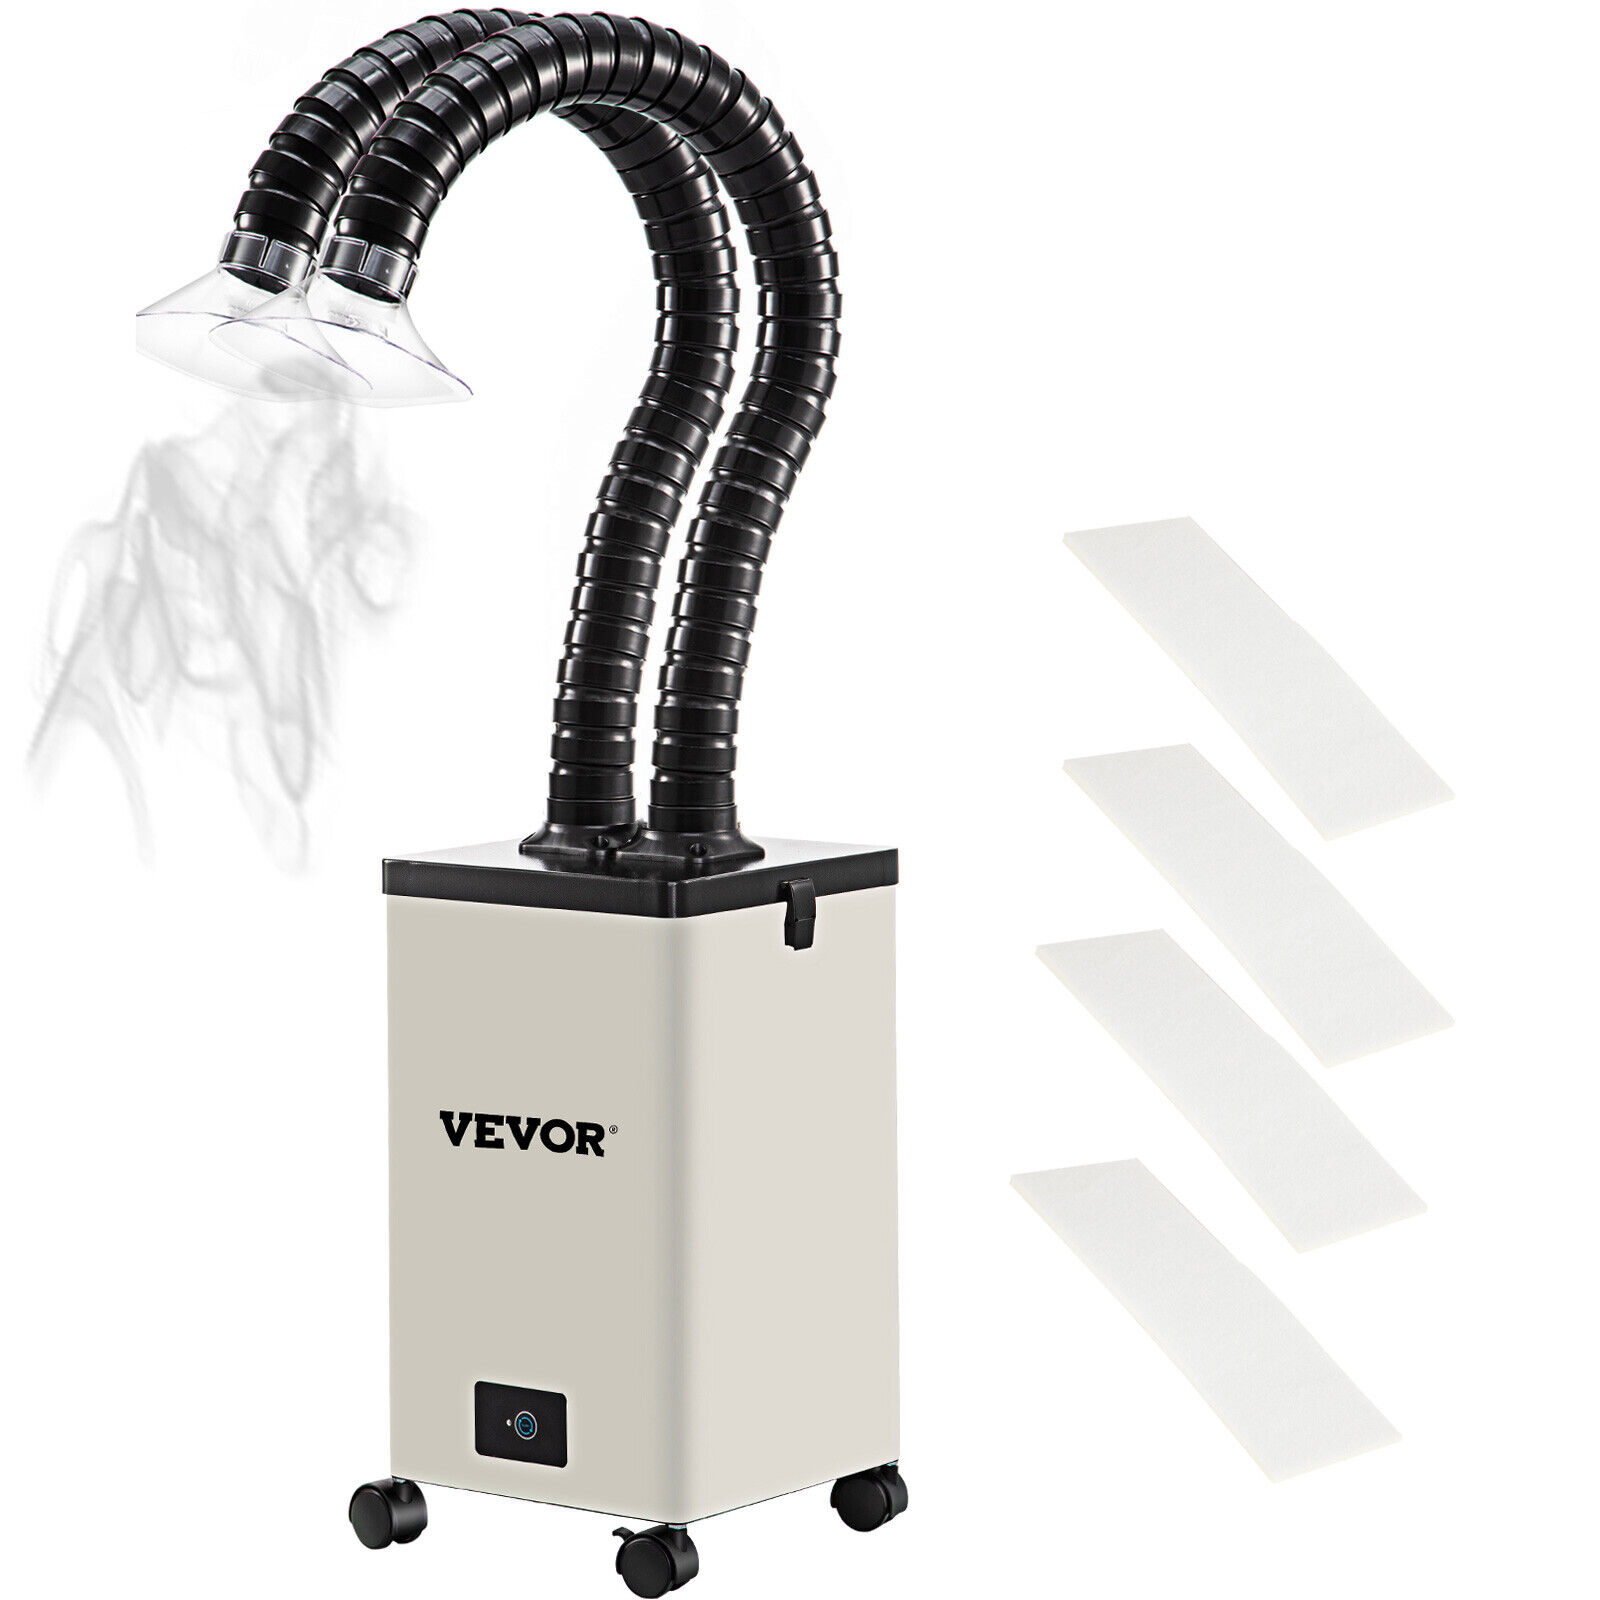 VEVOR 150W Pure Air Fume Extractor 3 Filter Smoke Purifier for Laser Engraver